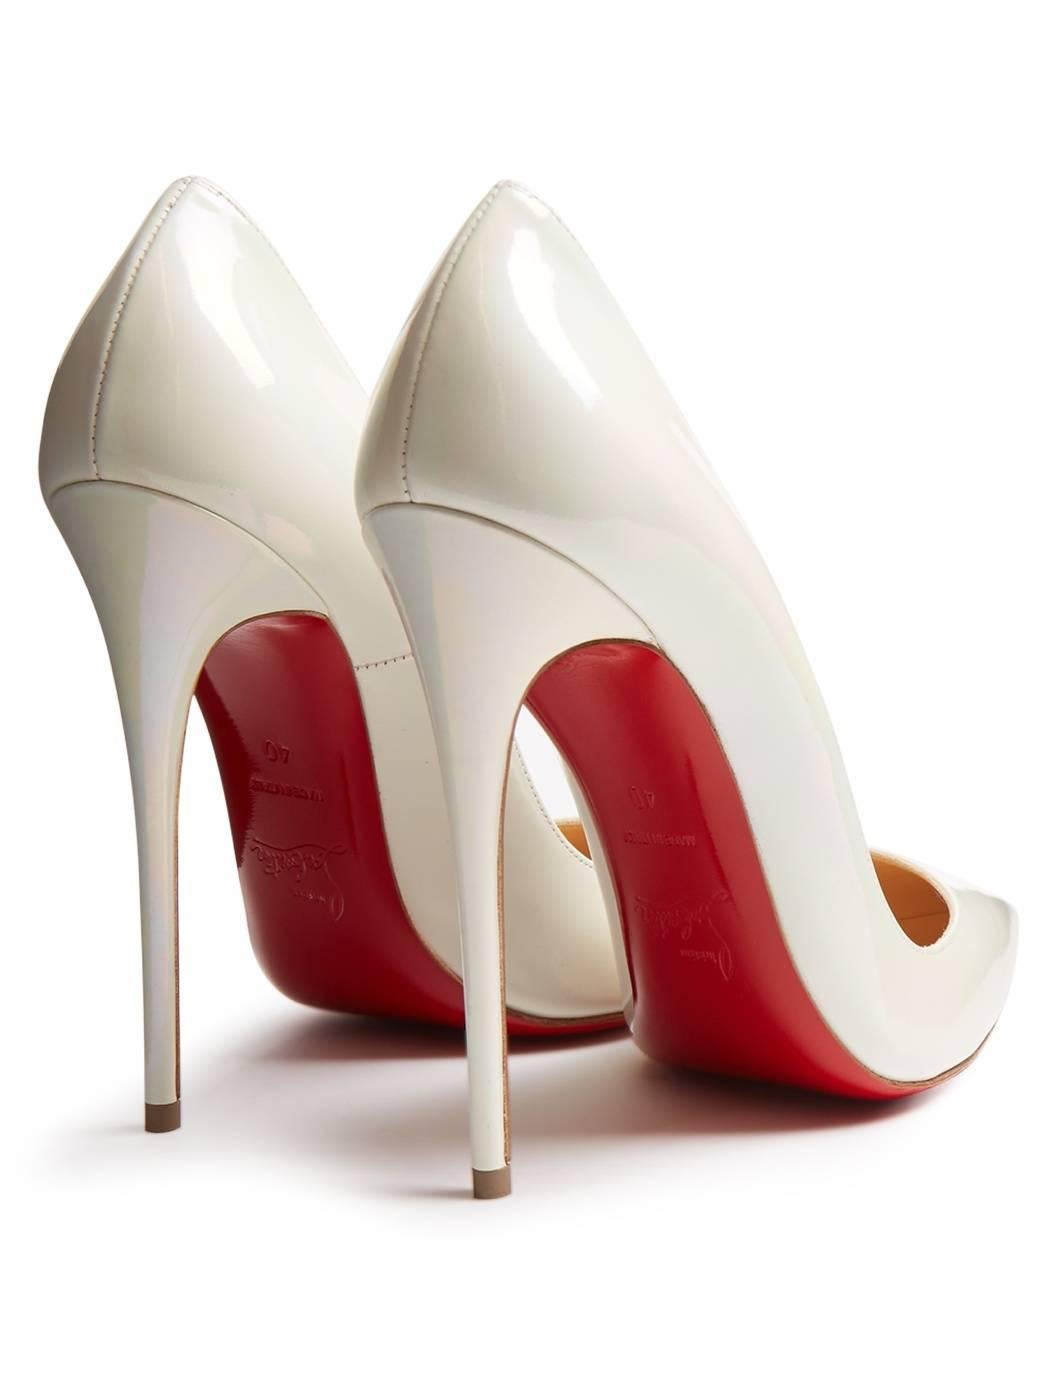 Christian Louboutin New Sold Out White Iridescent So Kate Heels Pumps in Box 1